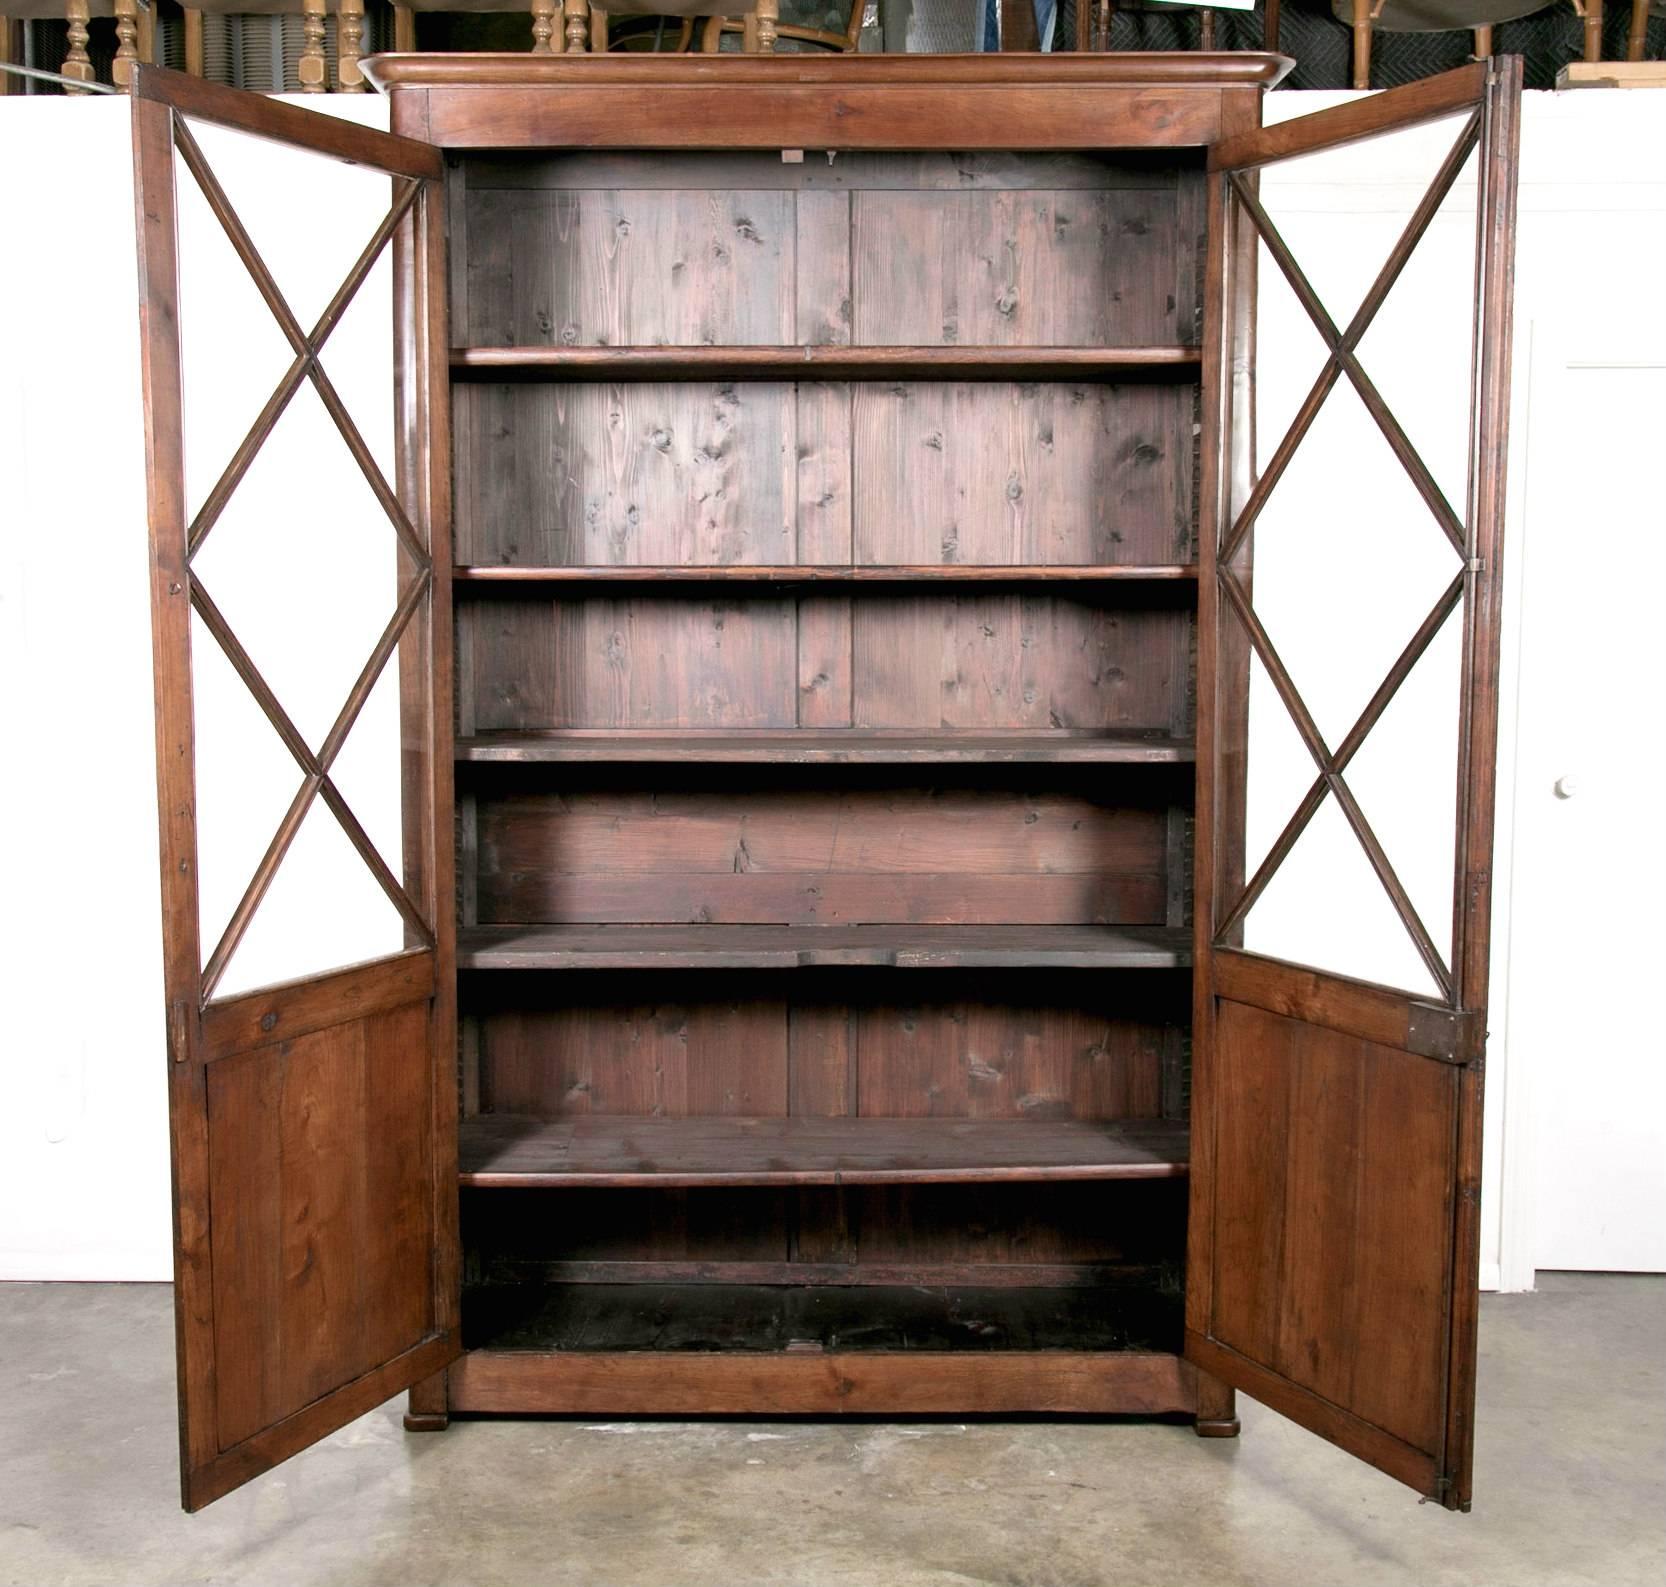 Elegant 19th century French period Louis Philippe bibliotheque (bookcase) handcrafted of solid cherry by talented artisans near Mont Saint-Michel, an island commune in Normandy, having a molded cornice above a pair of three-quarter glass paneled